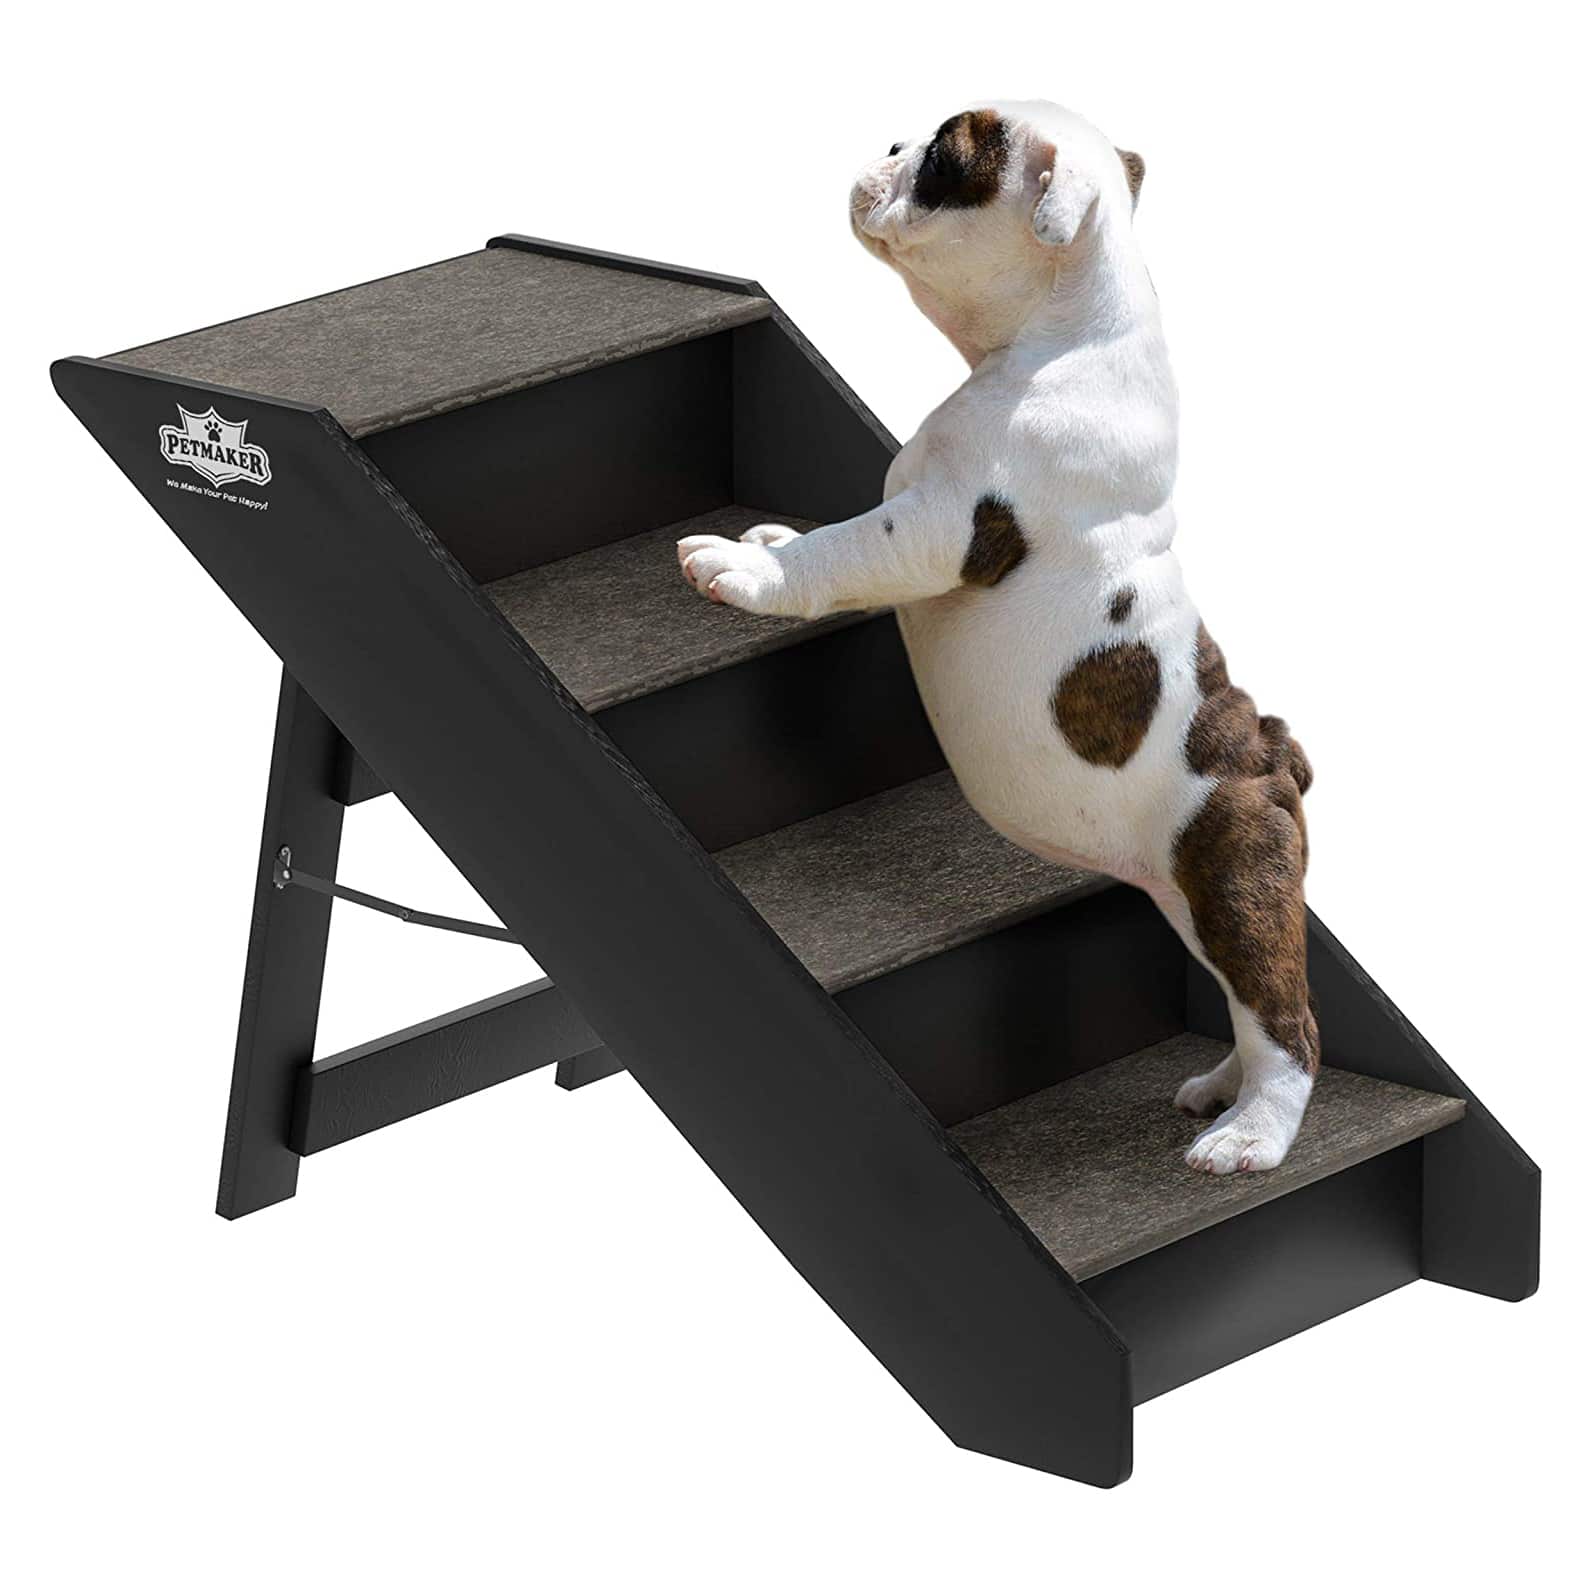 Top 10 Best Wooden Pet Stairs in 2021 Reviews Buyer’s Guide